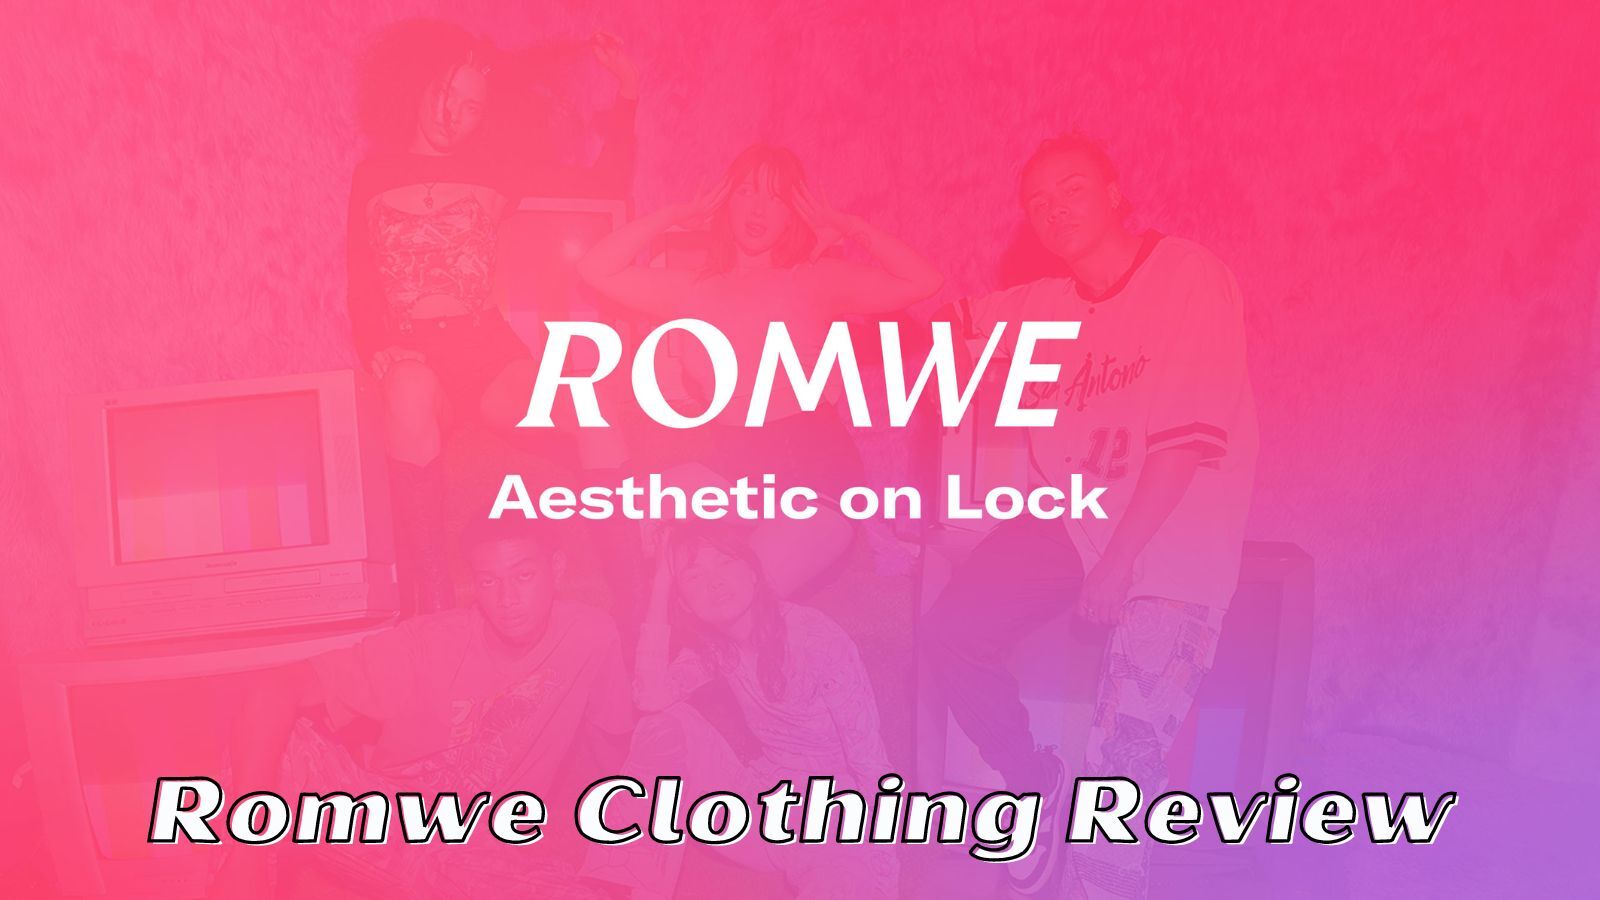 Romwe Clothing Review: Is This Online Store Legit or a Scam? 